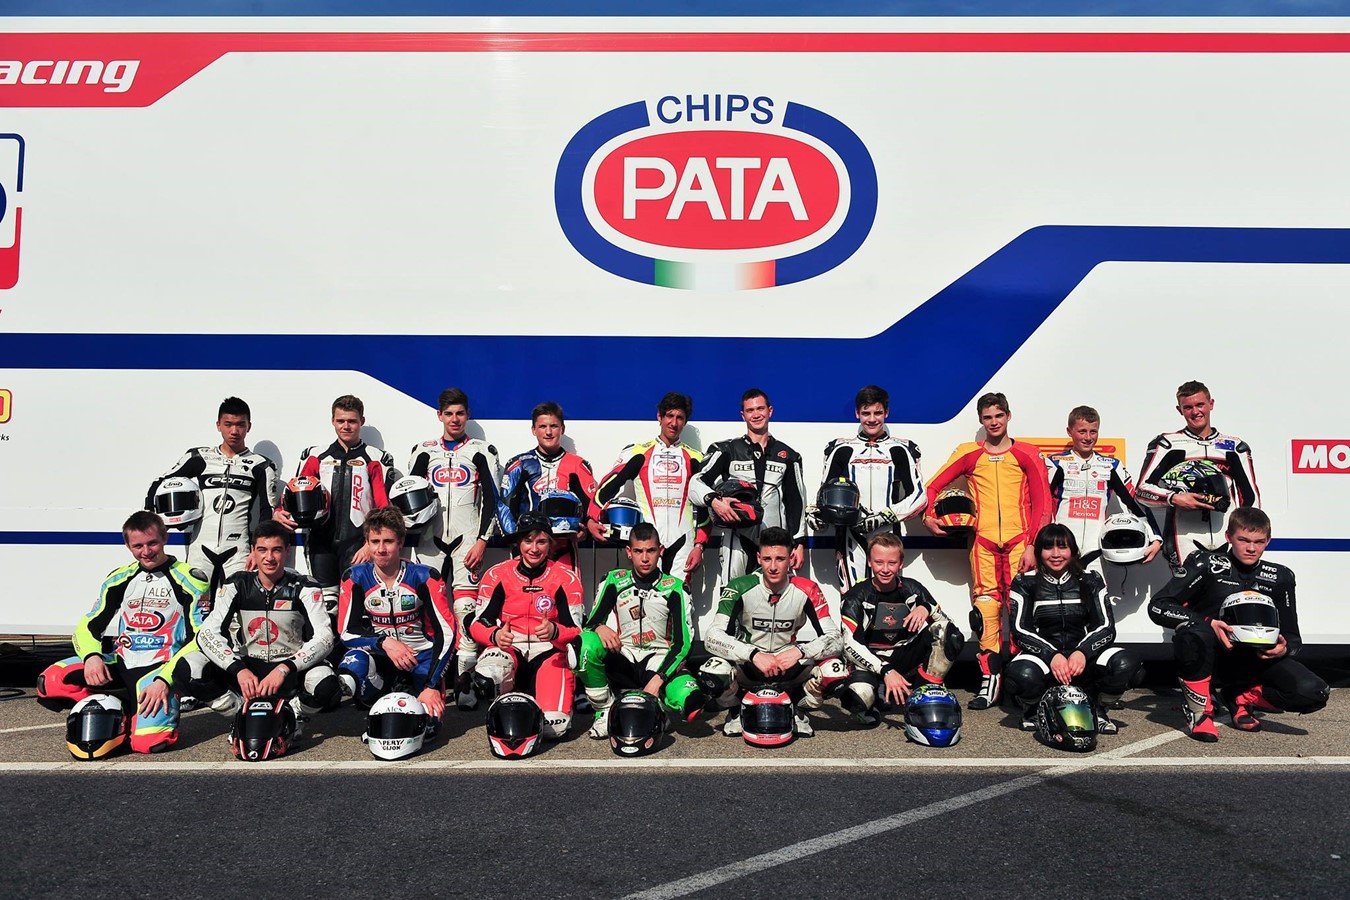 Pata European Junior Cup powers up for 2015 with new Honda CBR650F